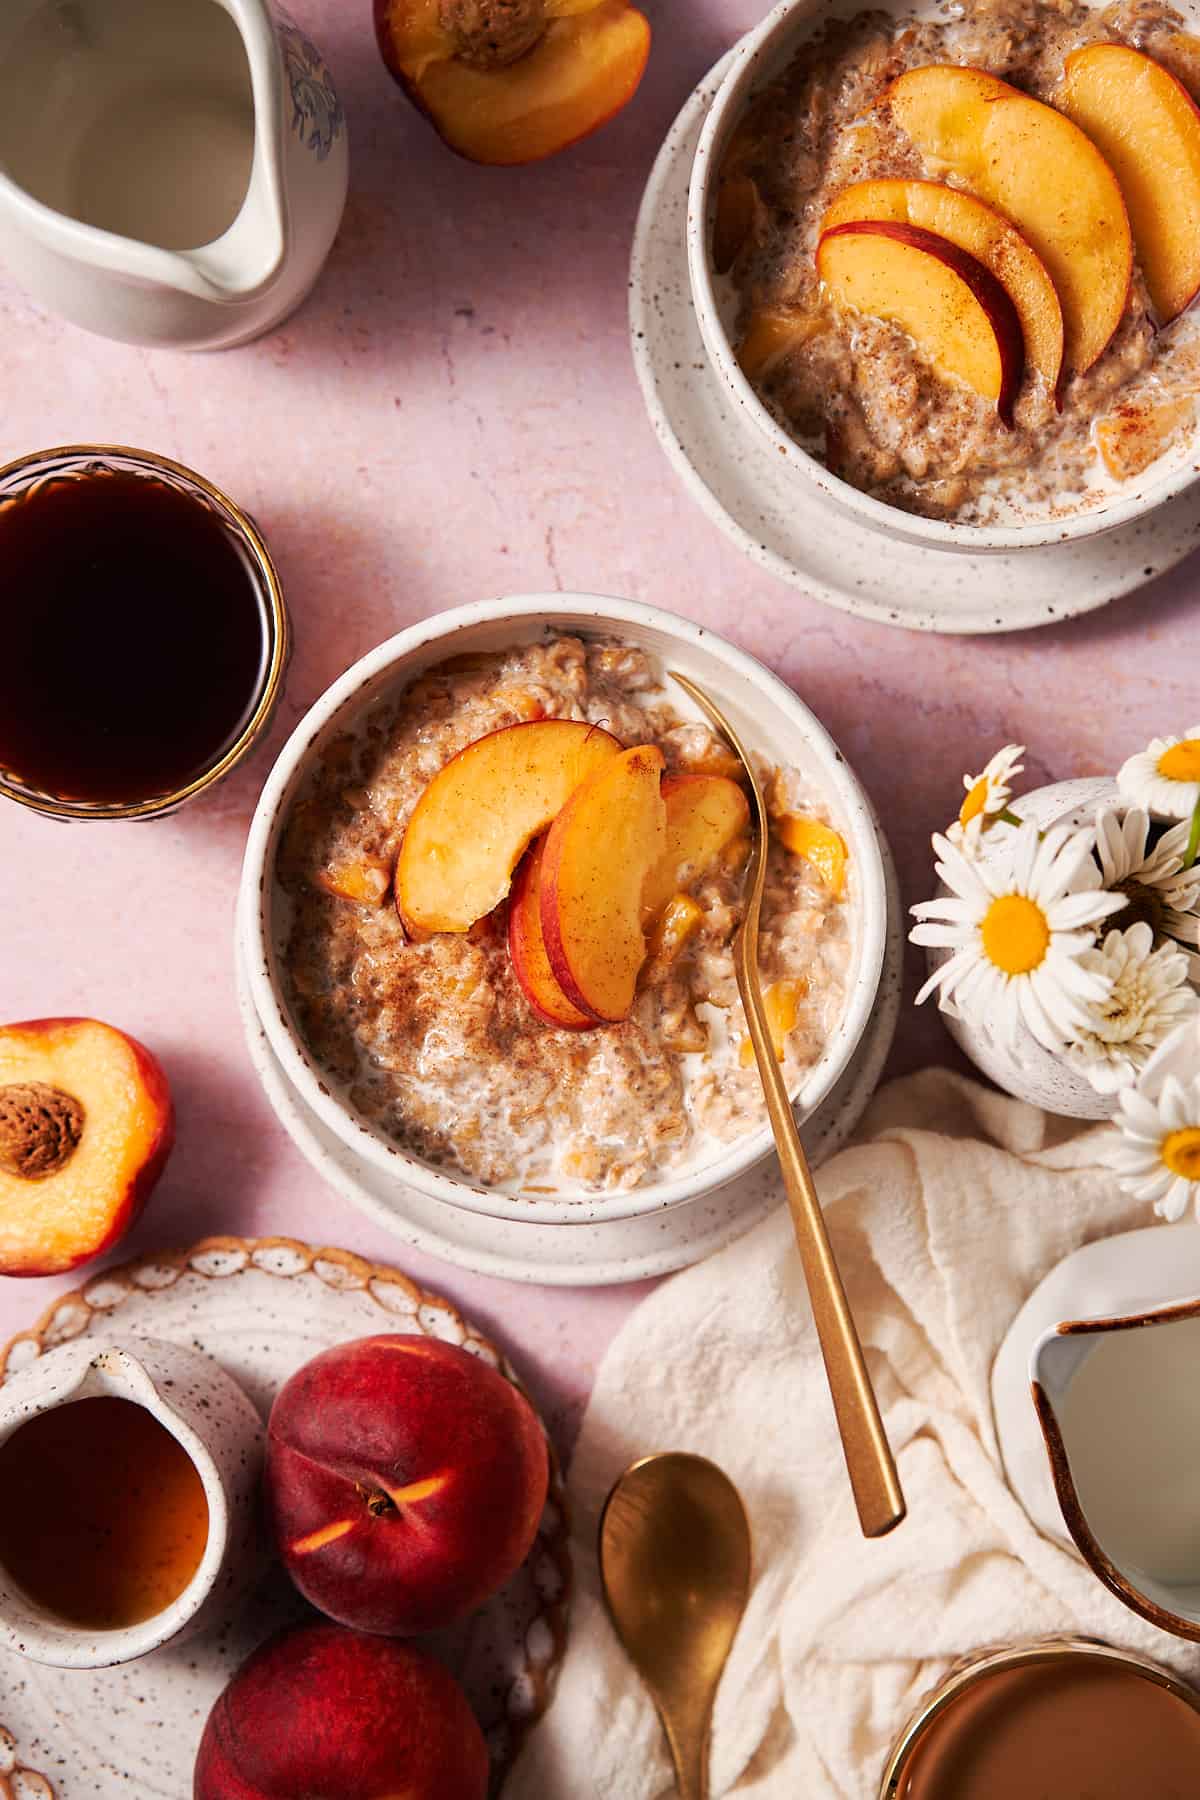 flat lay shot of peaches and cream oatmeal, with daisies in a ceramic vase, fresh coffee, maple syrup, and fresh peaches on the scene.